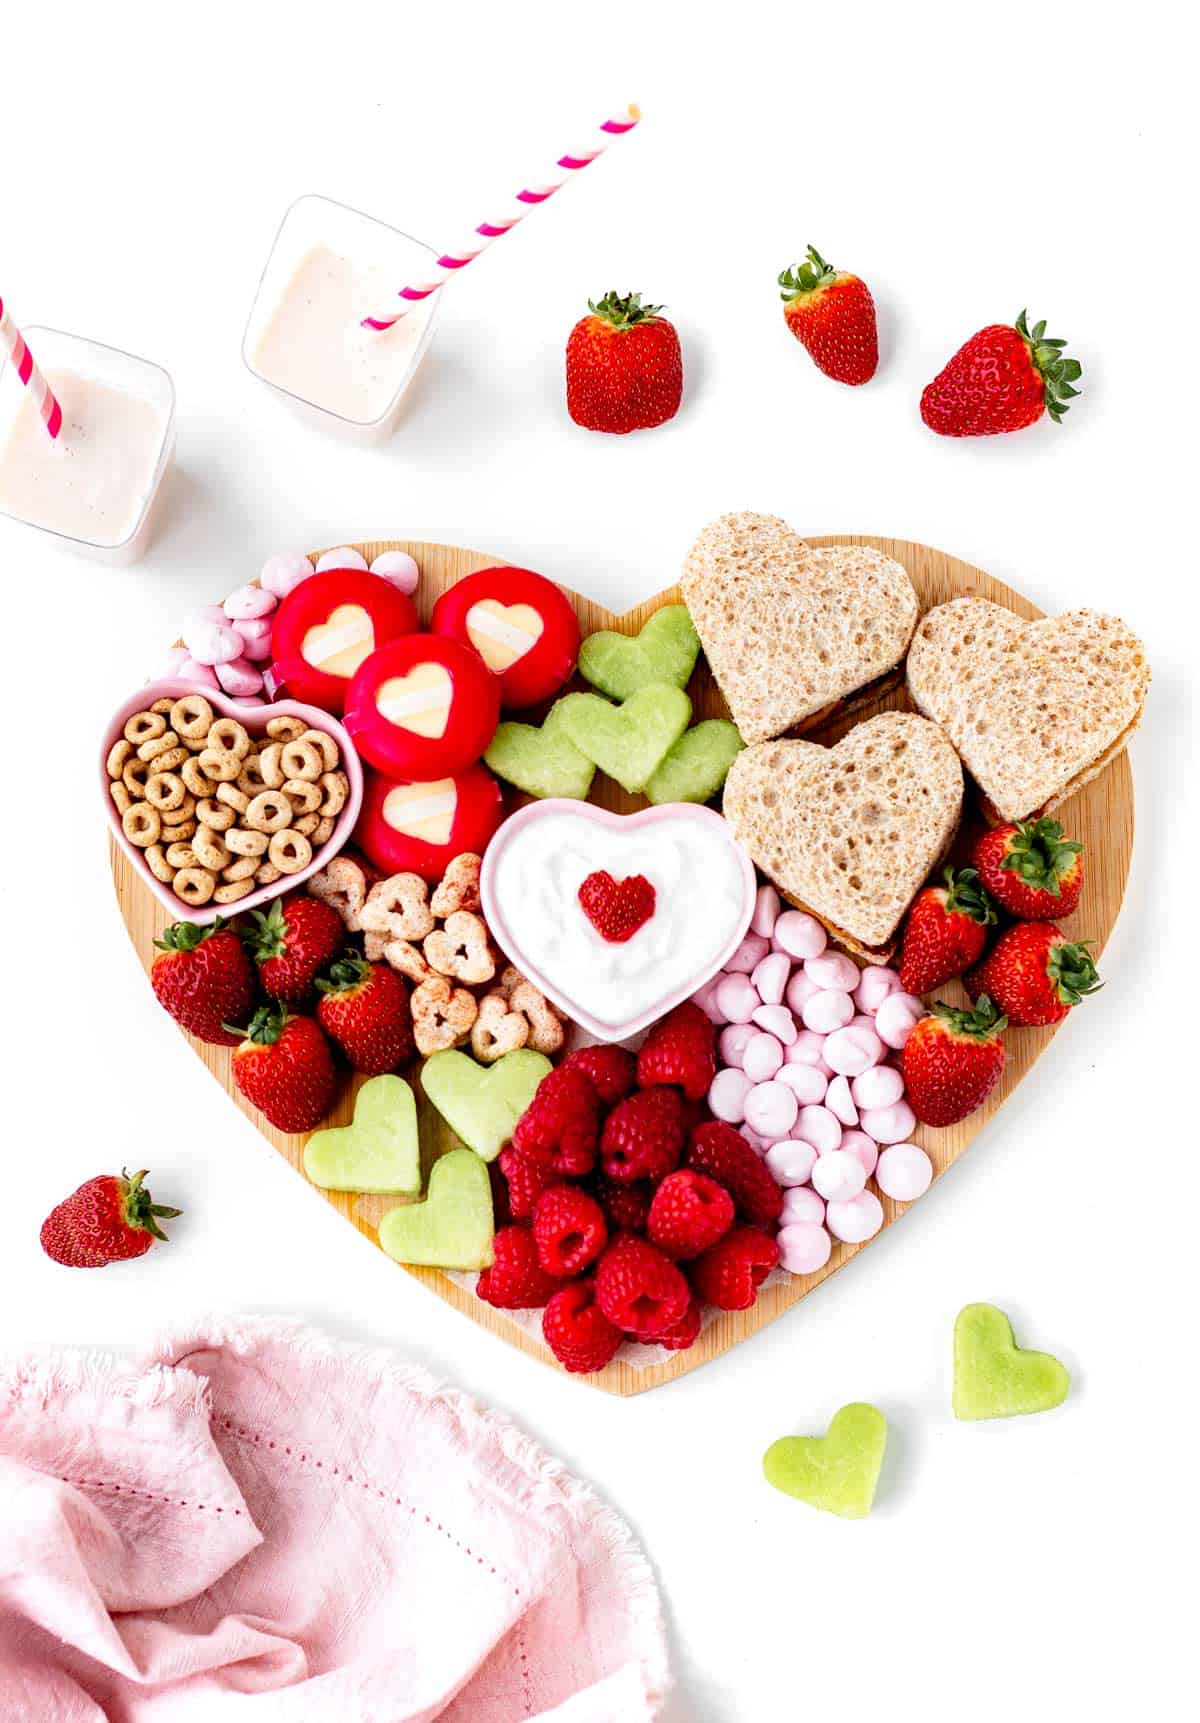 A birds-eye view of the heart shaped charcuterie board, with fresh strawberries surrounding the edges.